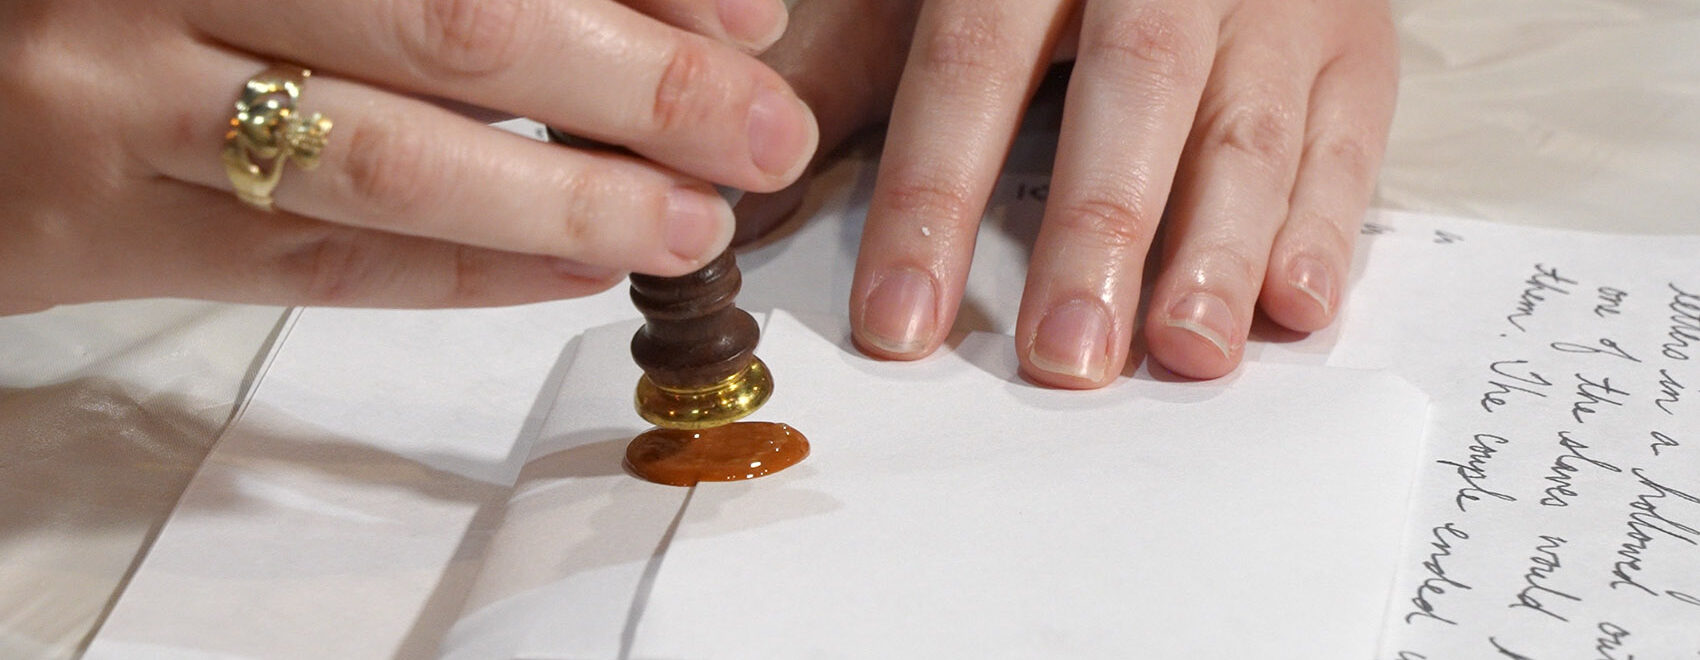 woman's hands adding wax and seal to a folded letter